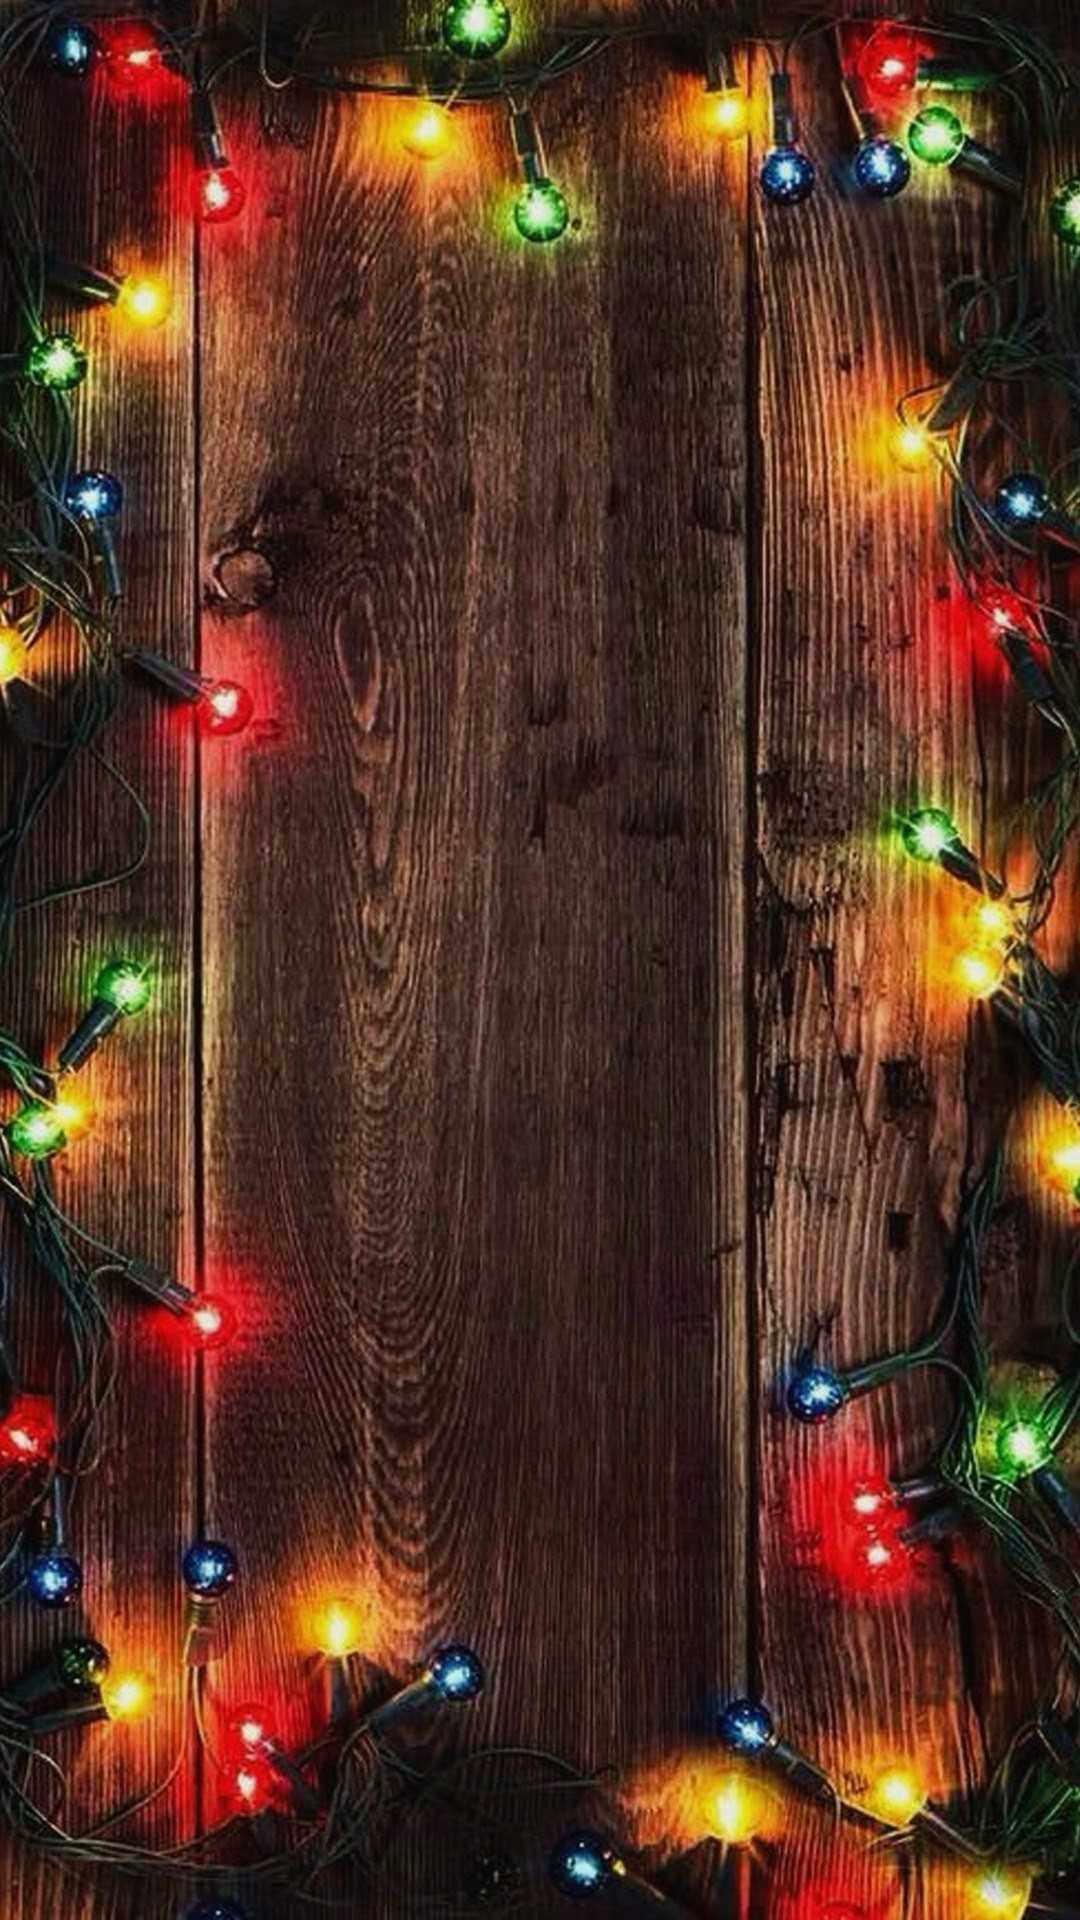 https://www.ixpap.com/images/2021/11/Christmas-Lights-Wallpapers-4.jpg